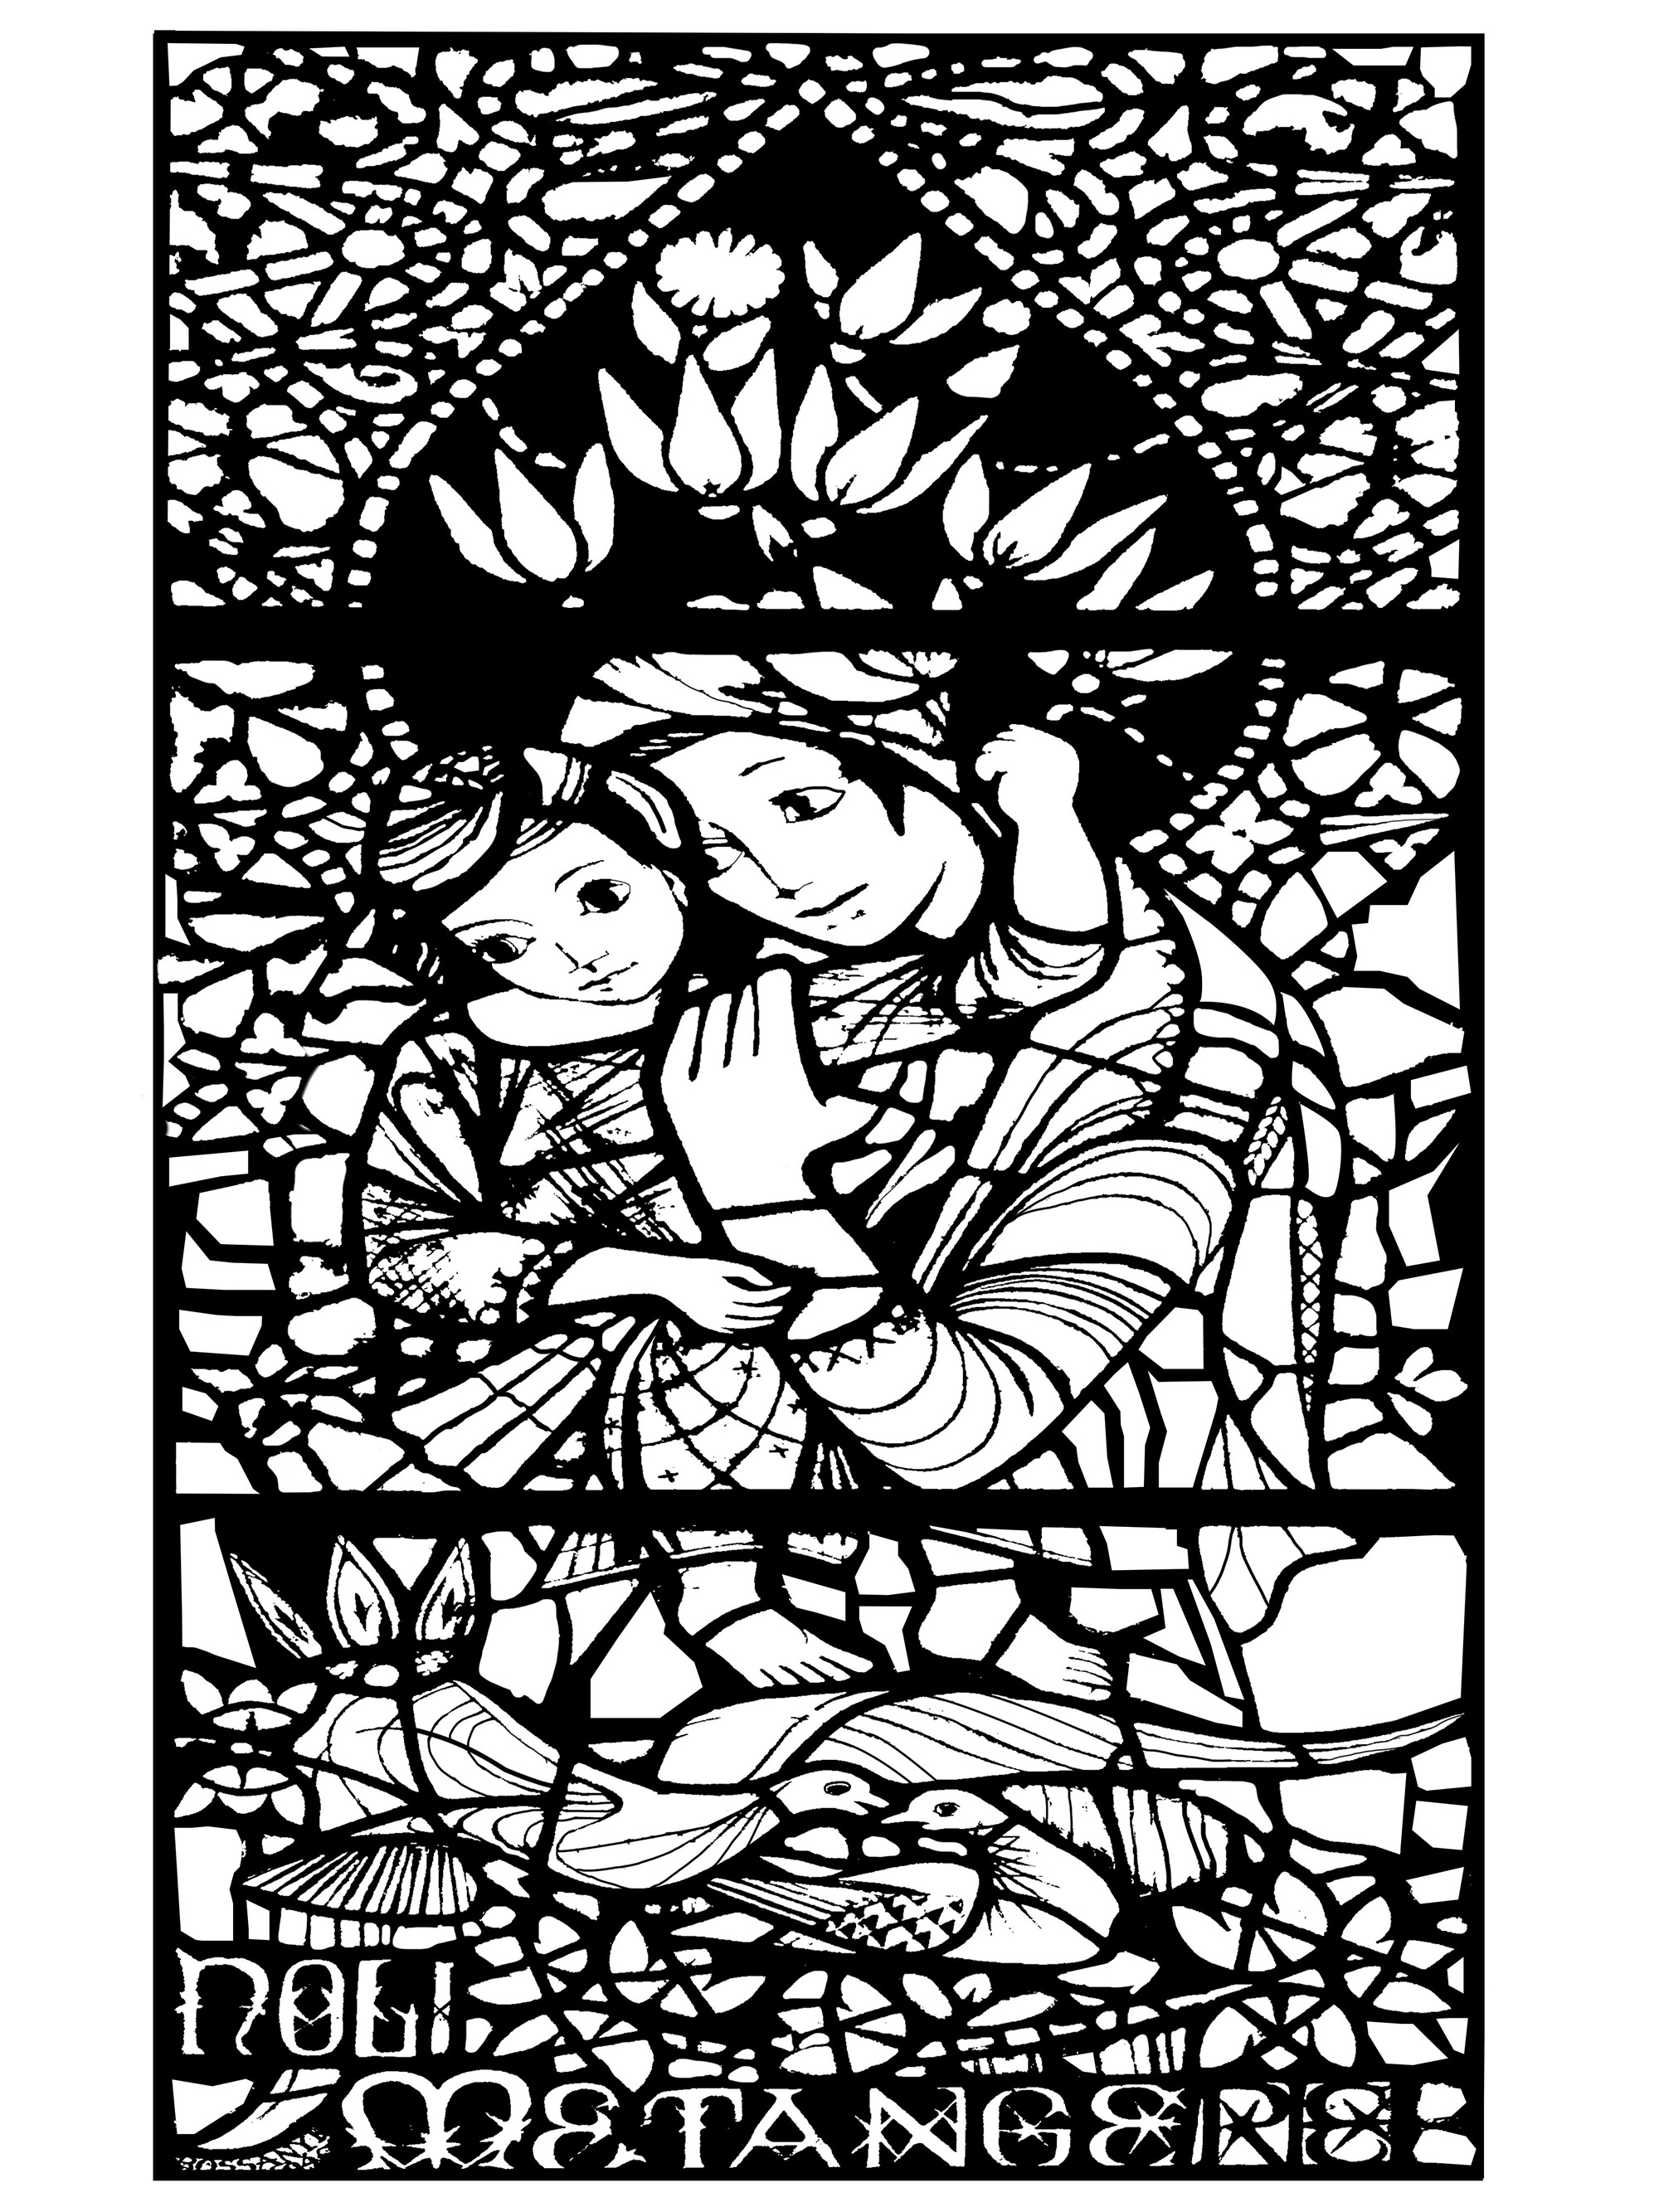 Coloring page created from a Stained glass : Noli Me Tangere, by Ervin Bossanyi (1946)